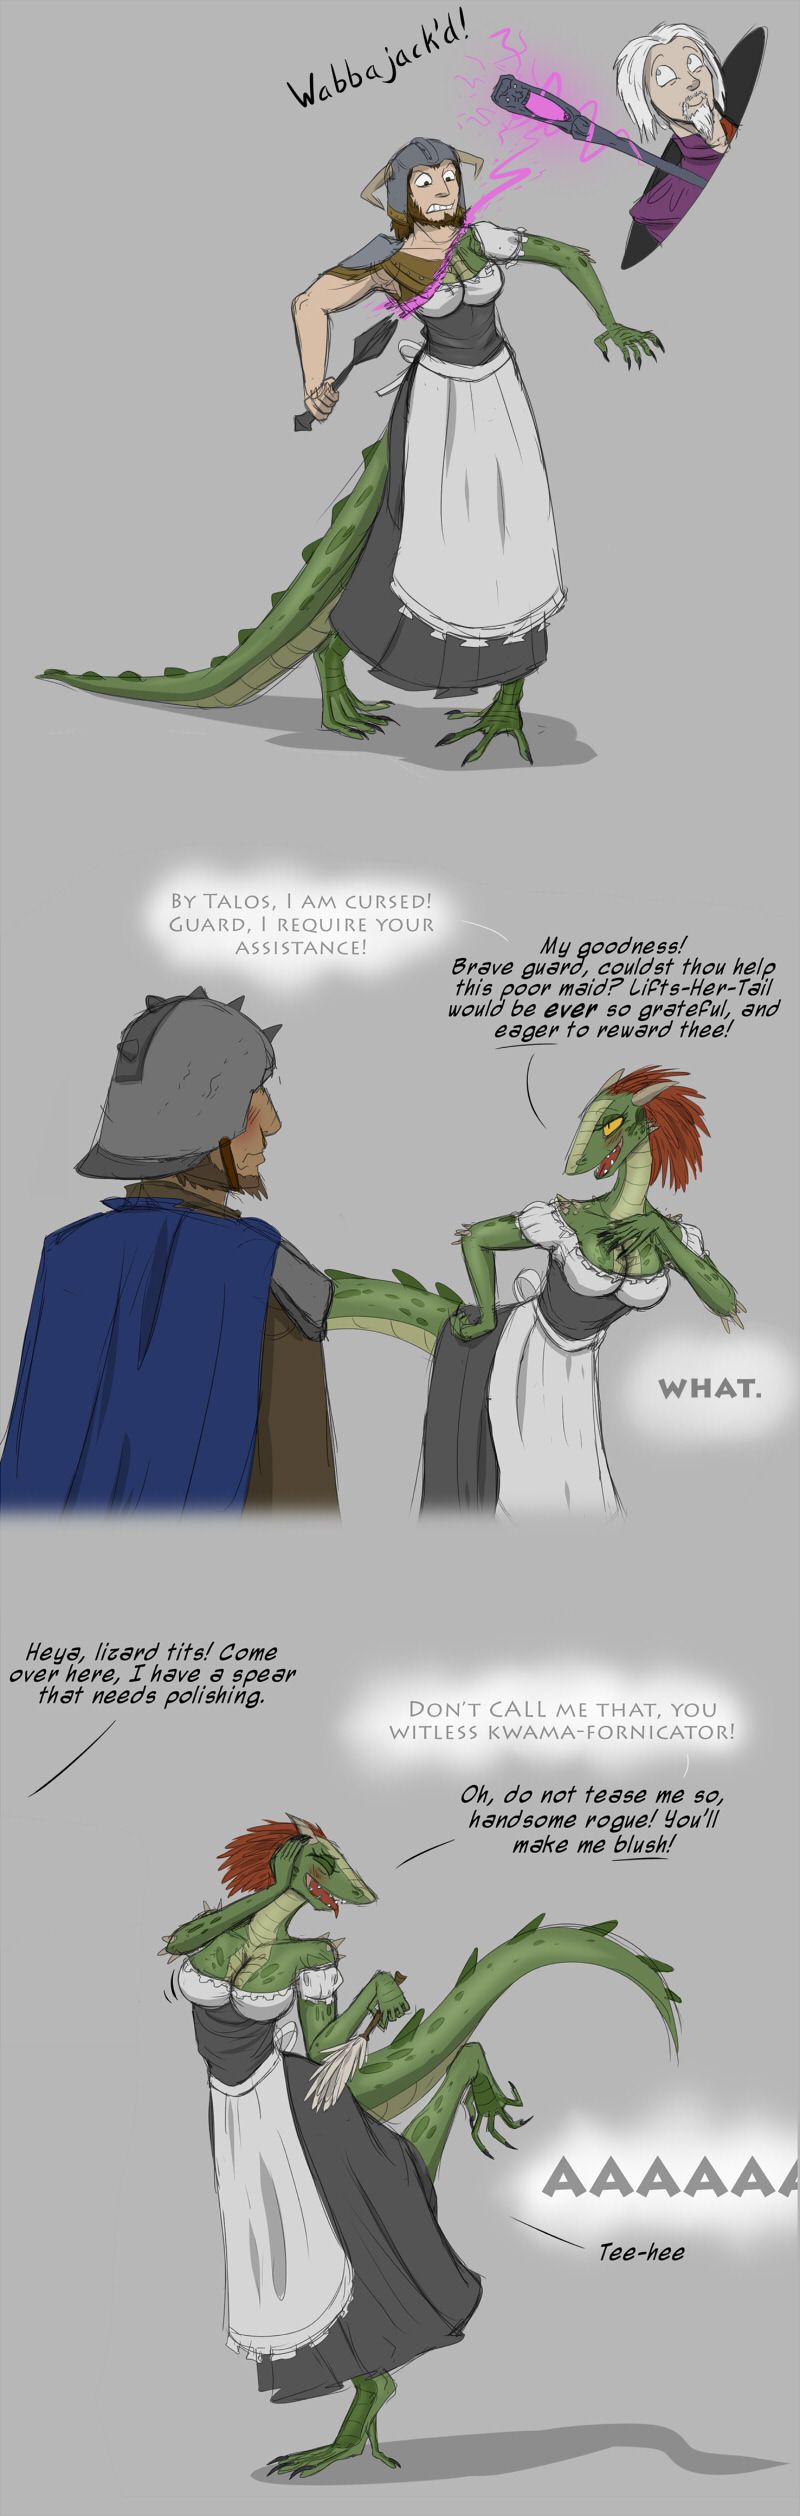 [Valsalia] Lusty Argonian Maid'd [Ongoing] 1